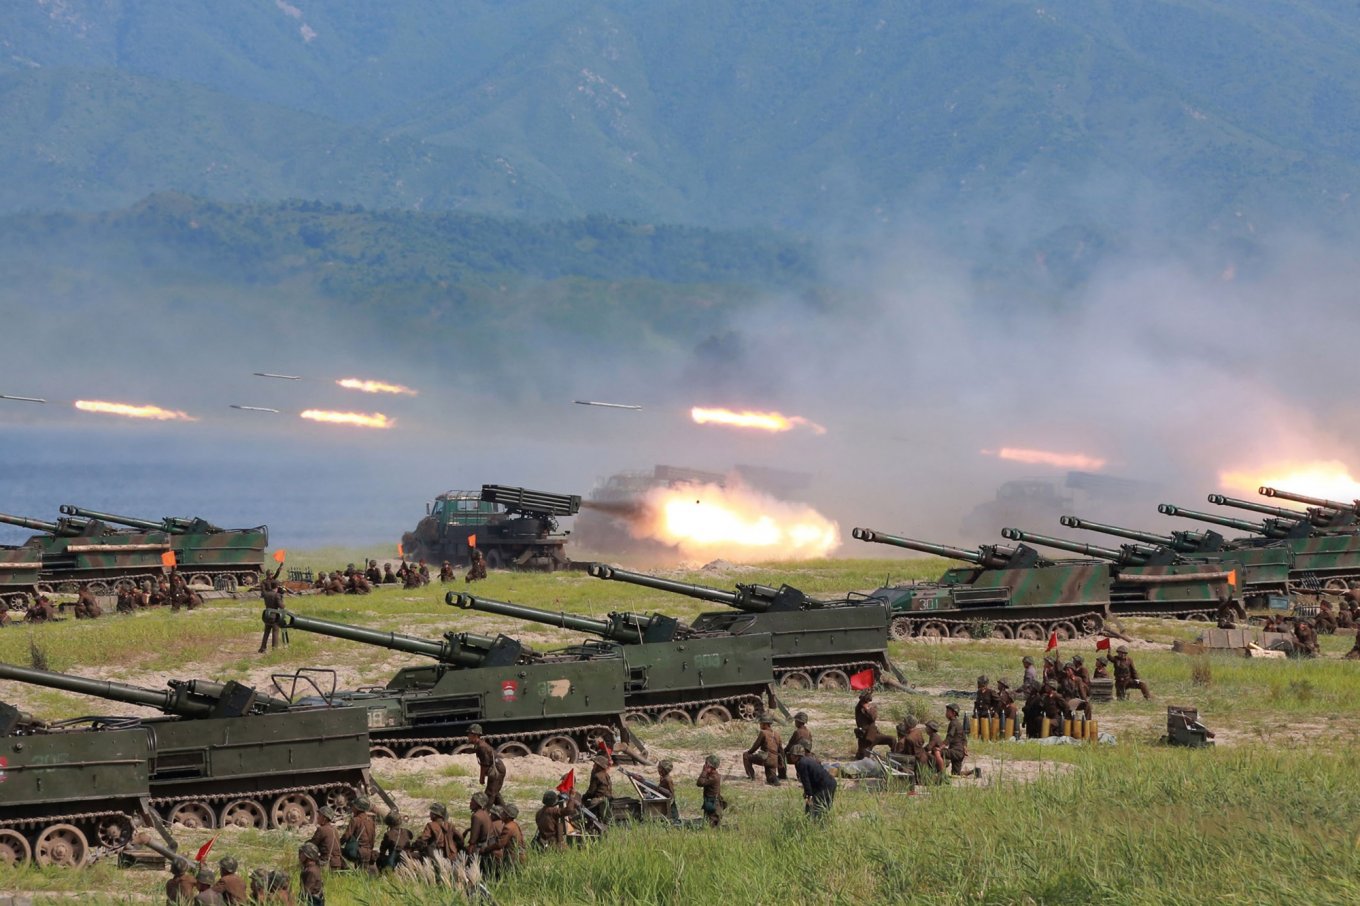 Military drills in North Korea Defense Express New russia’s Supply Line from North Korea Exposed, What Is the Price